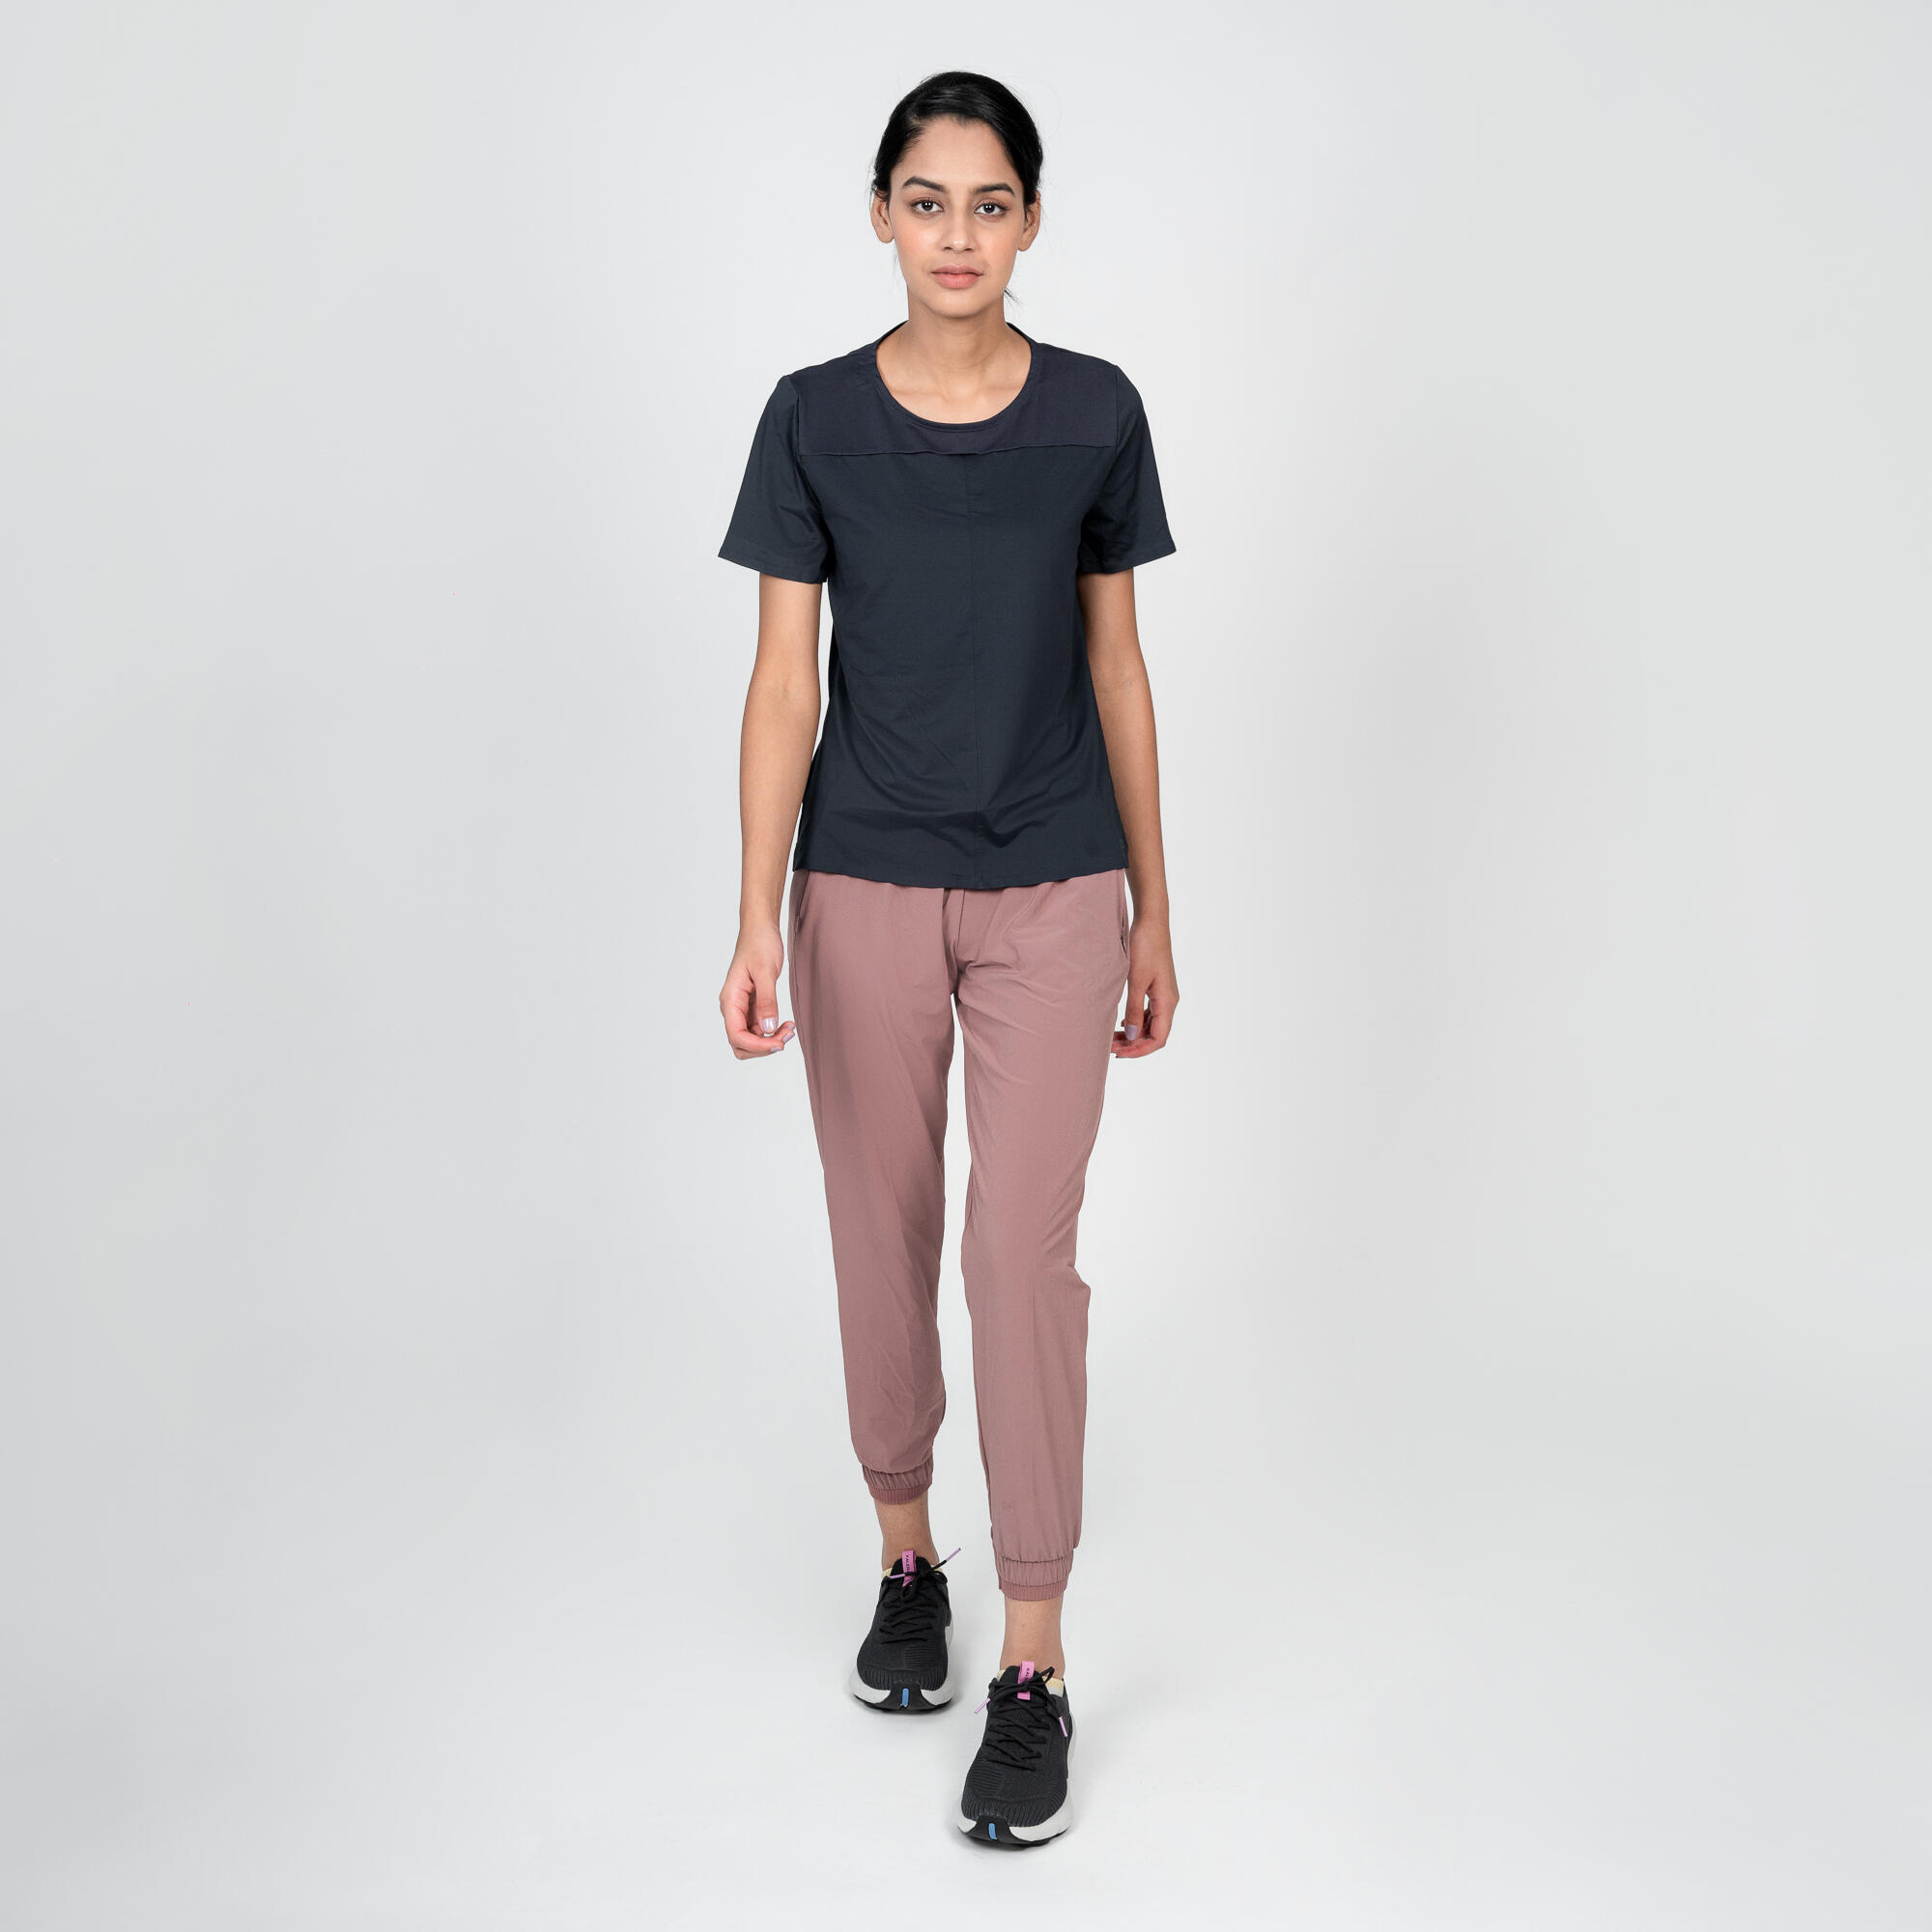 DOMYOS by Decathlon Solid Women Black Track Pants - Buy DOMYOS by Decathlon  Solid Women Black Track Pants Online at Best Prices in India | Flipkart.com